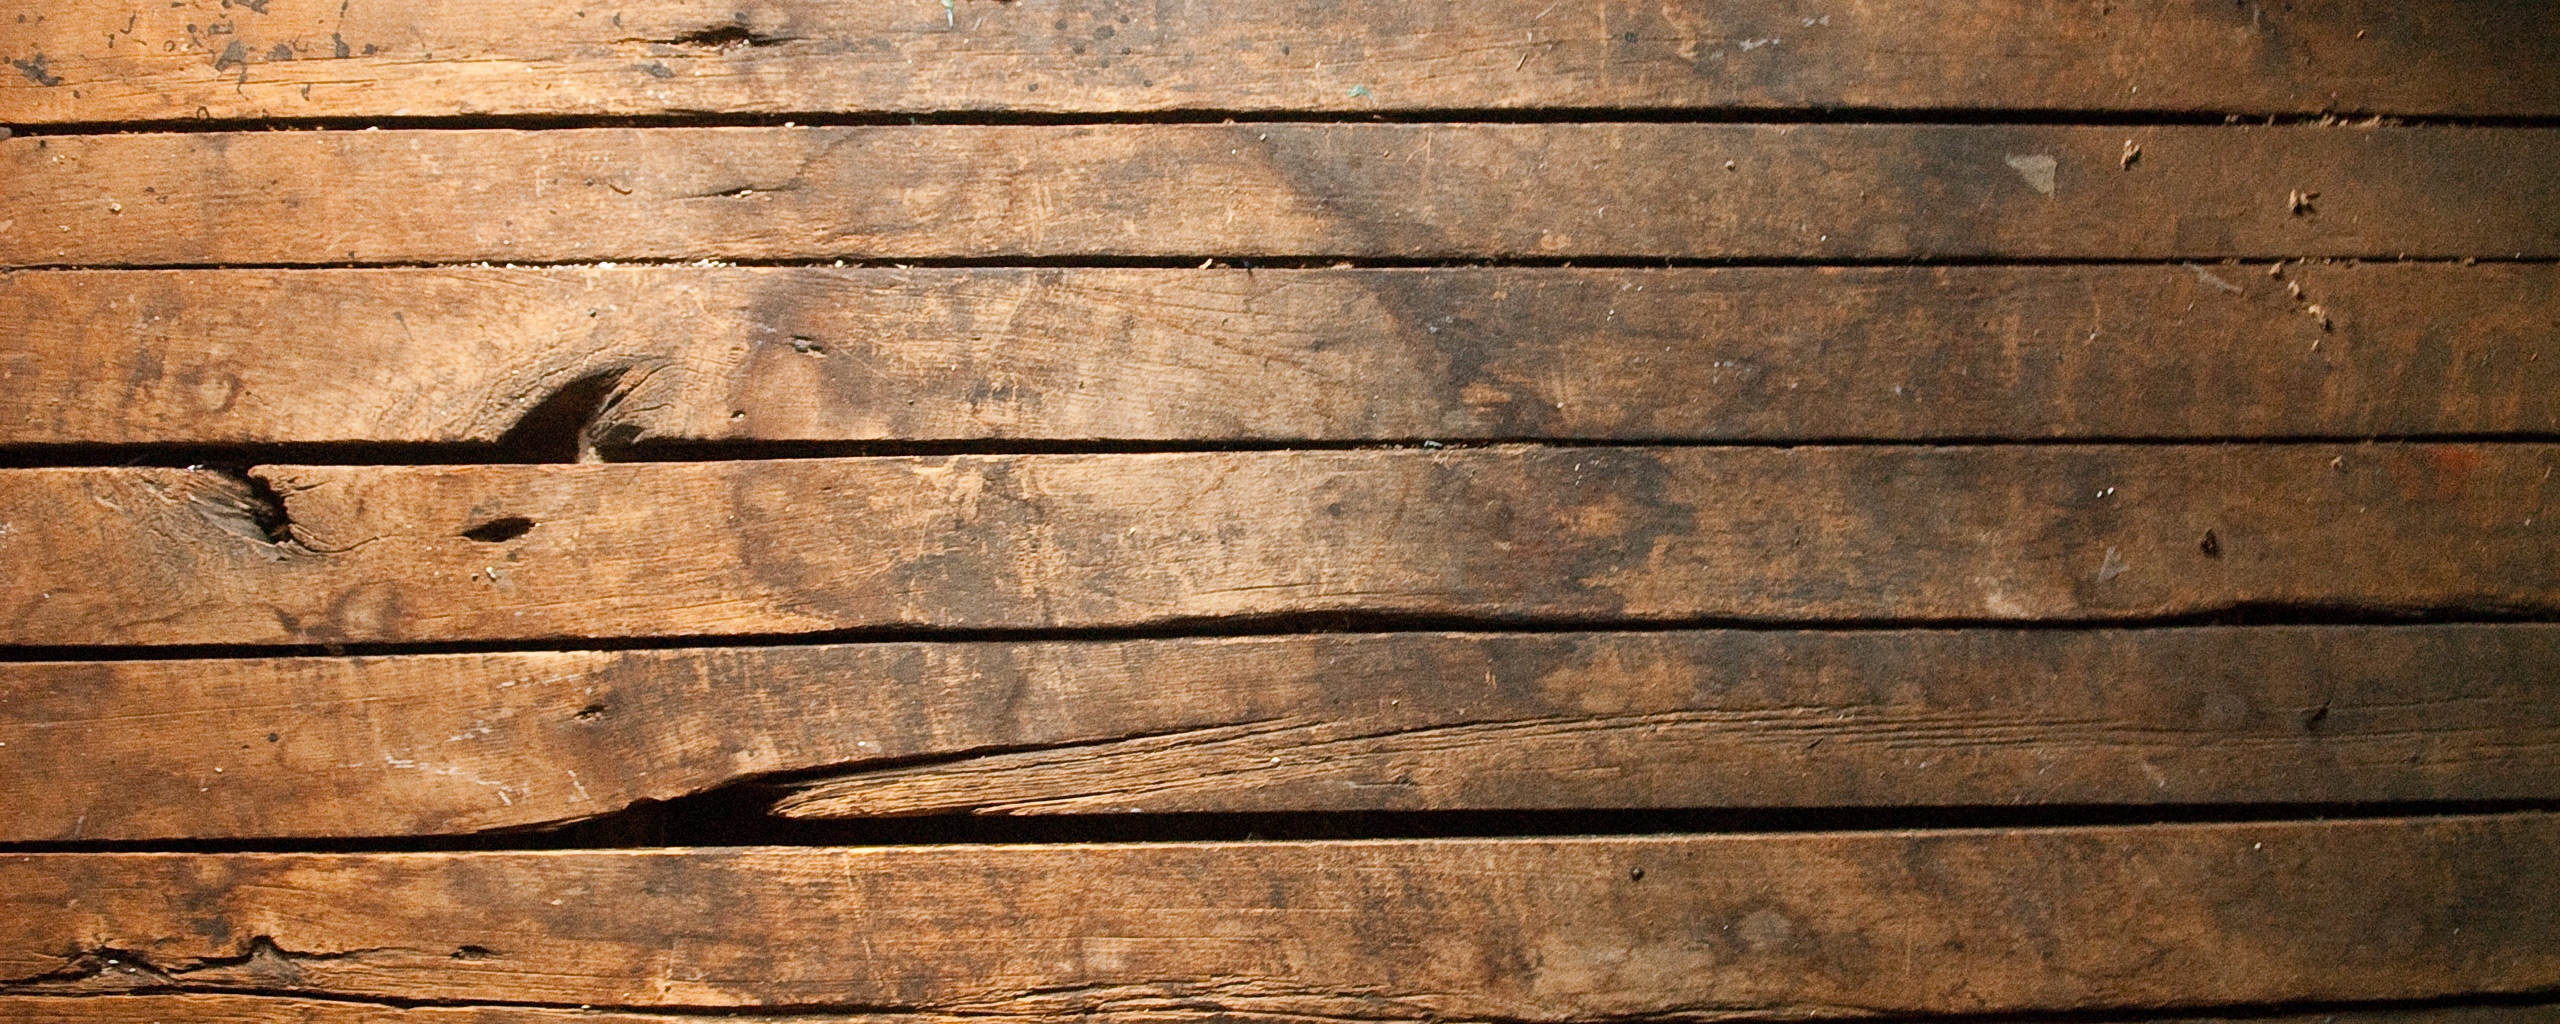 Wooden Planks Vertical Wallpaper Background Dual Monitor Resolution